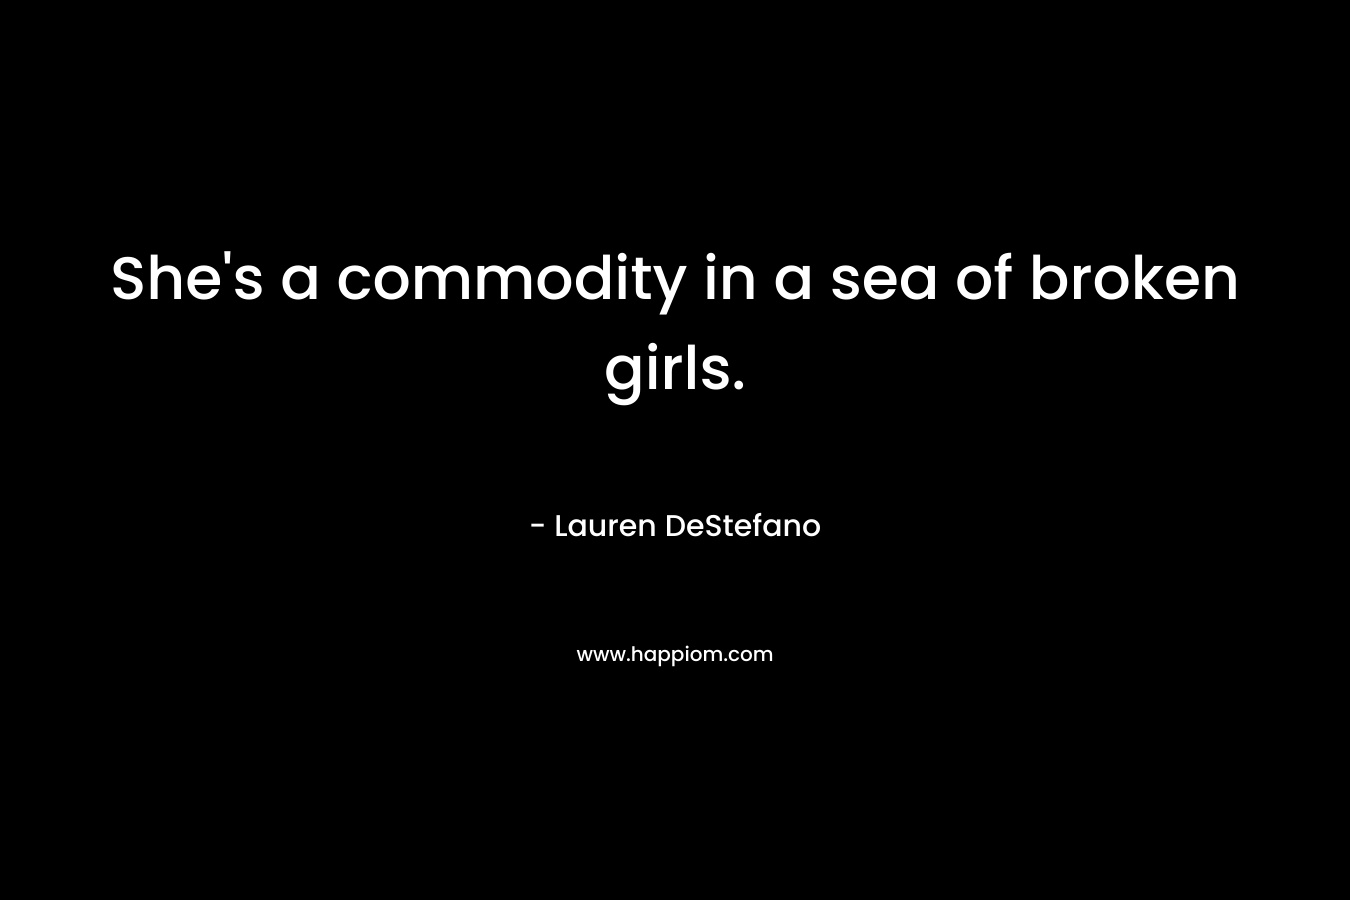 She's a commodity in a sea of broken girls.